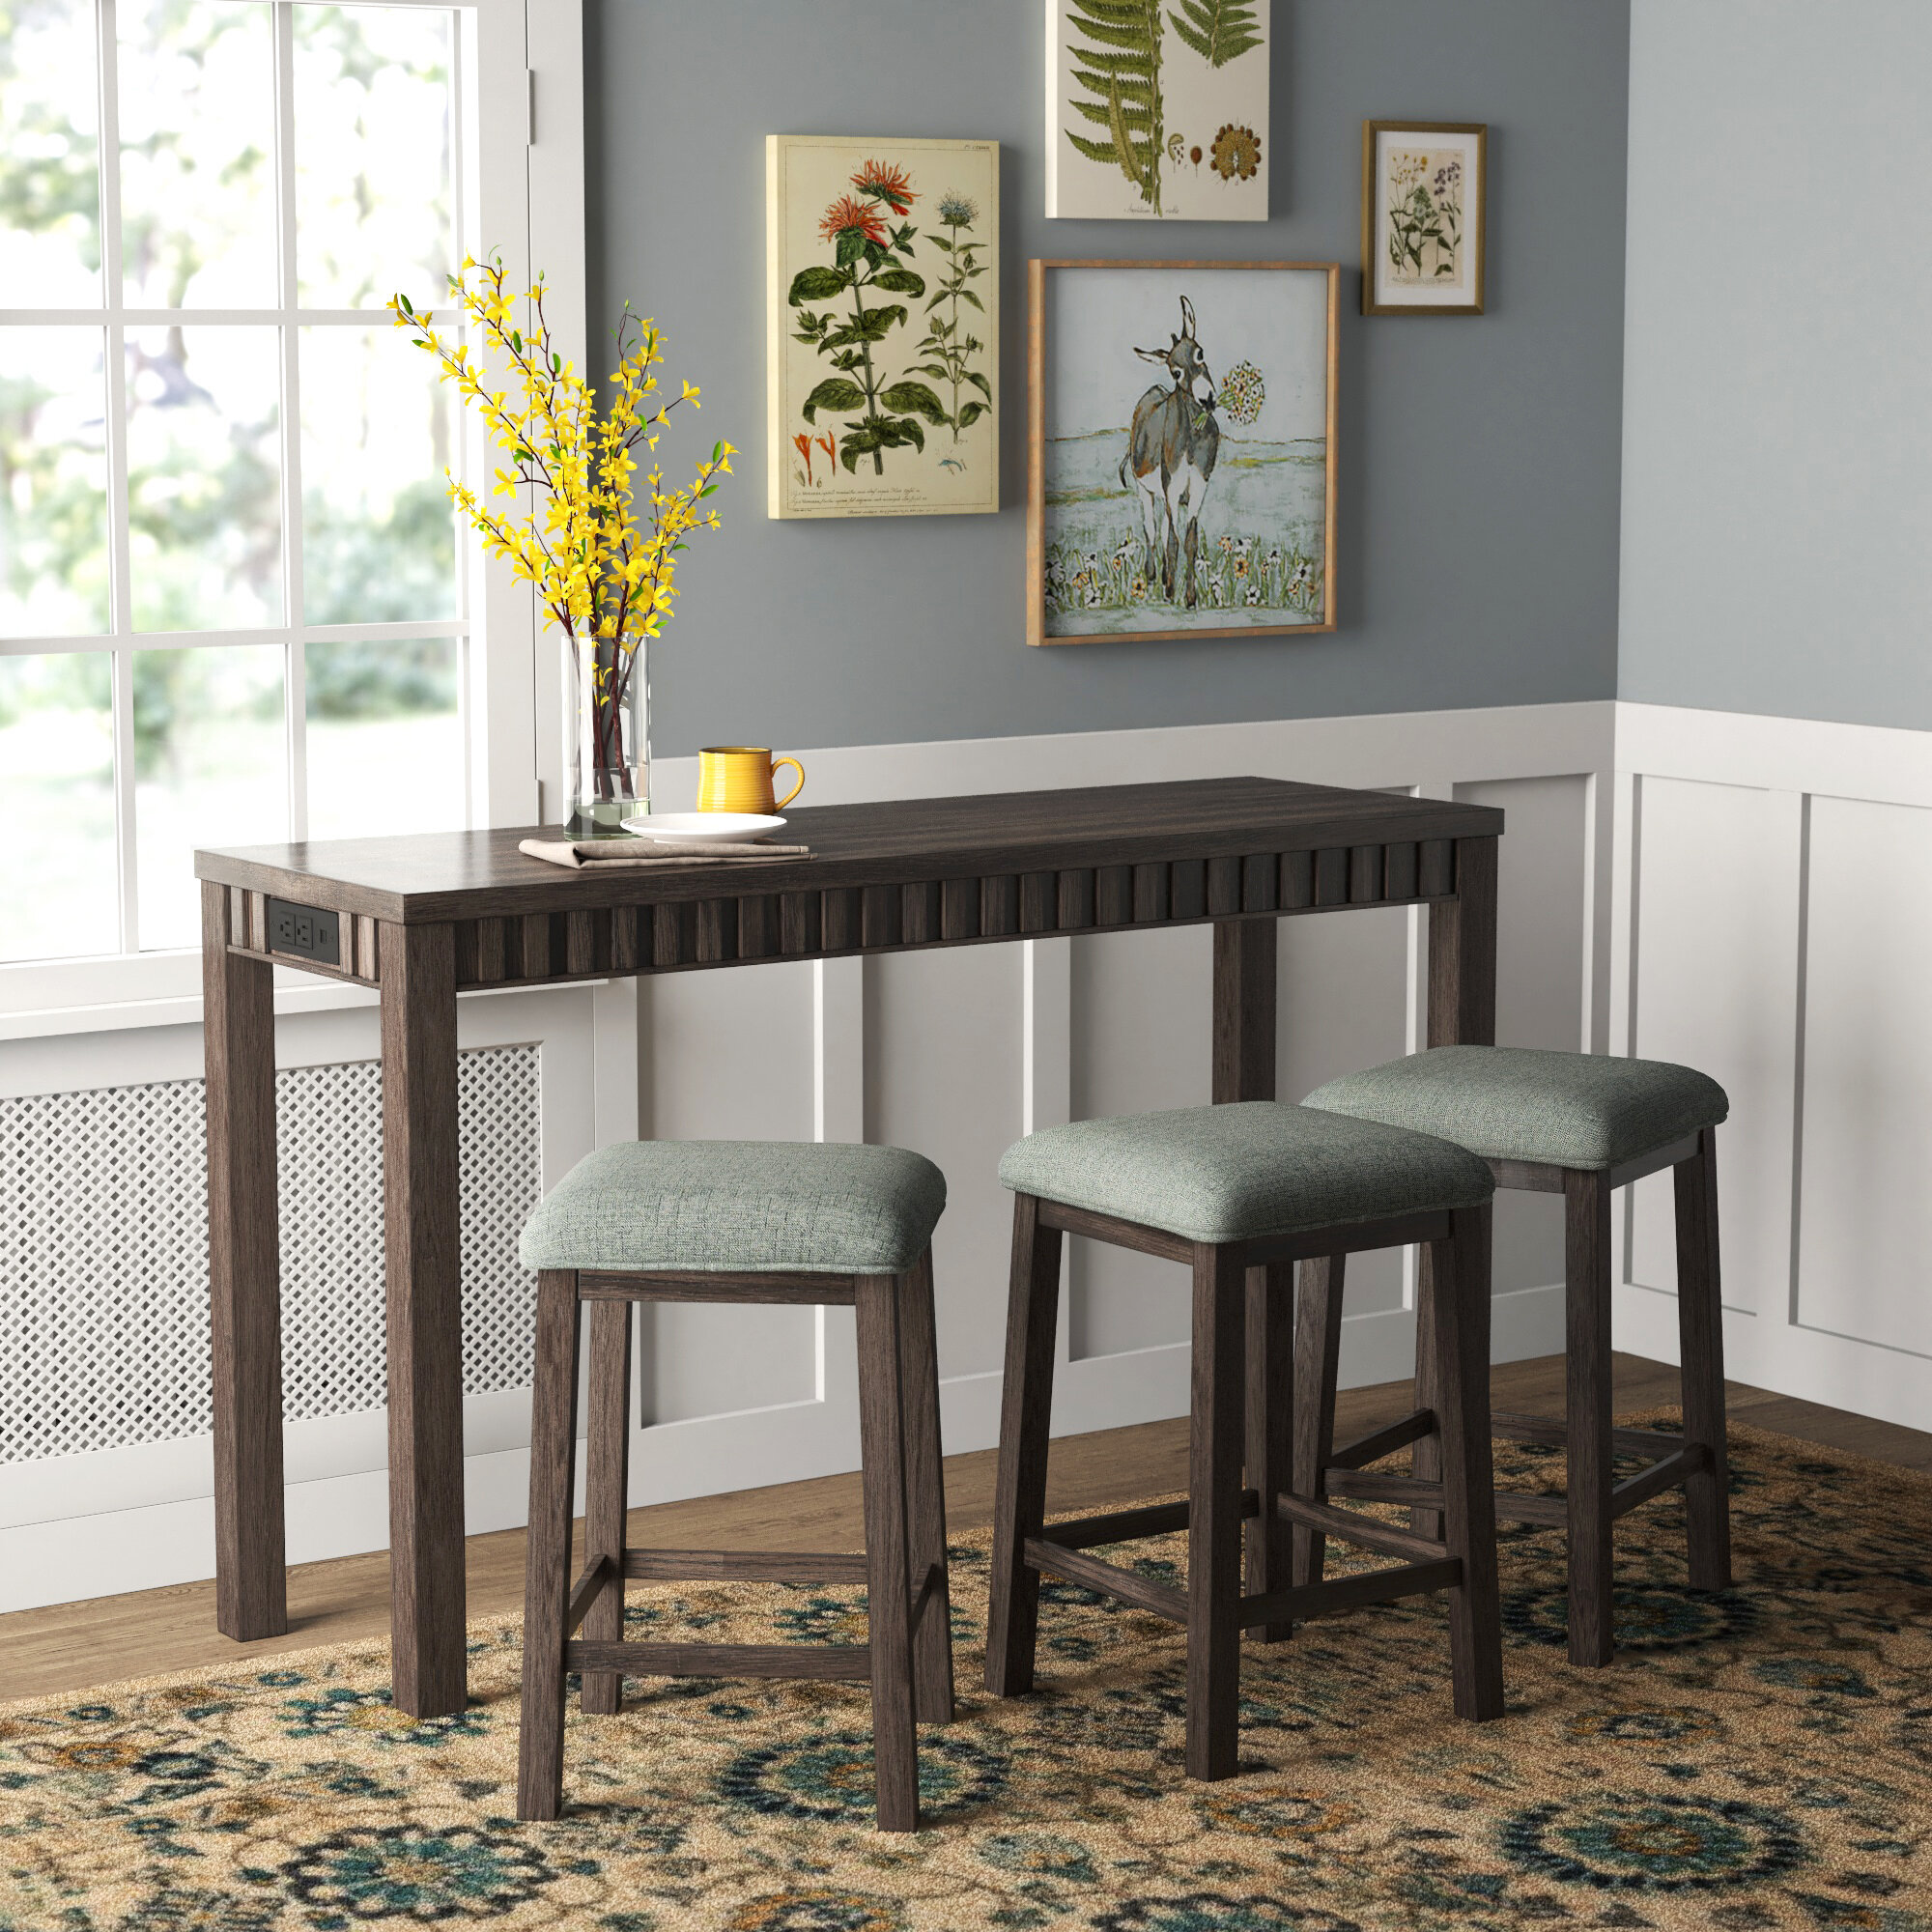 Laurel Foundry Modern Farmhouse® Kitchen & Dining Room Sets You'll Love